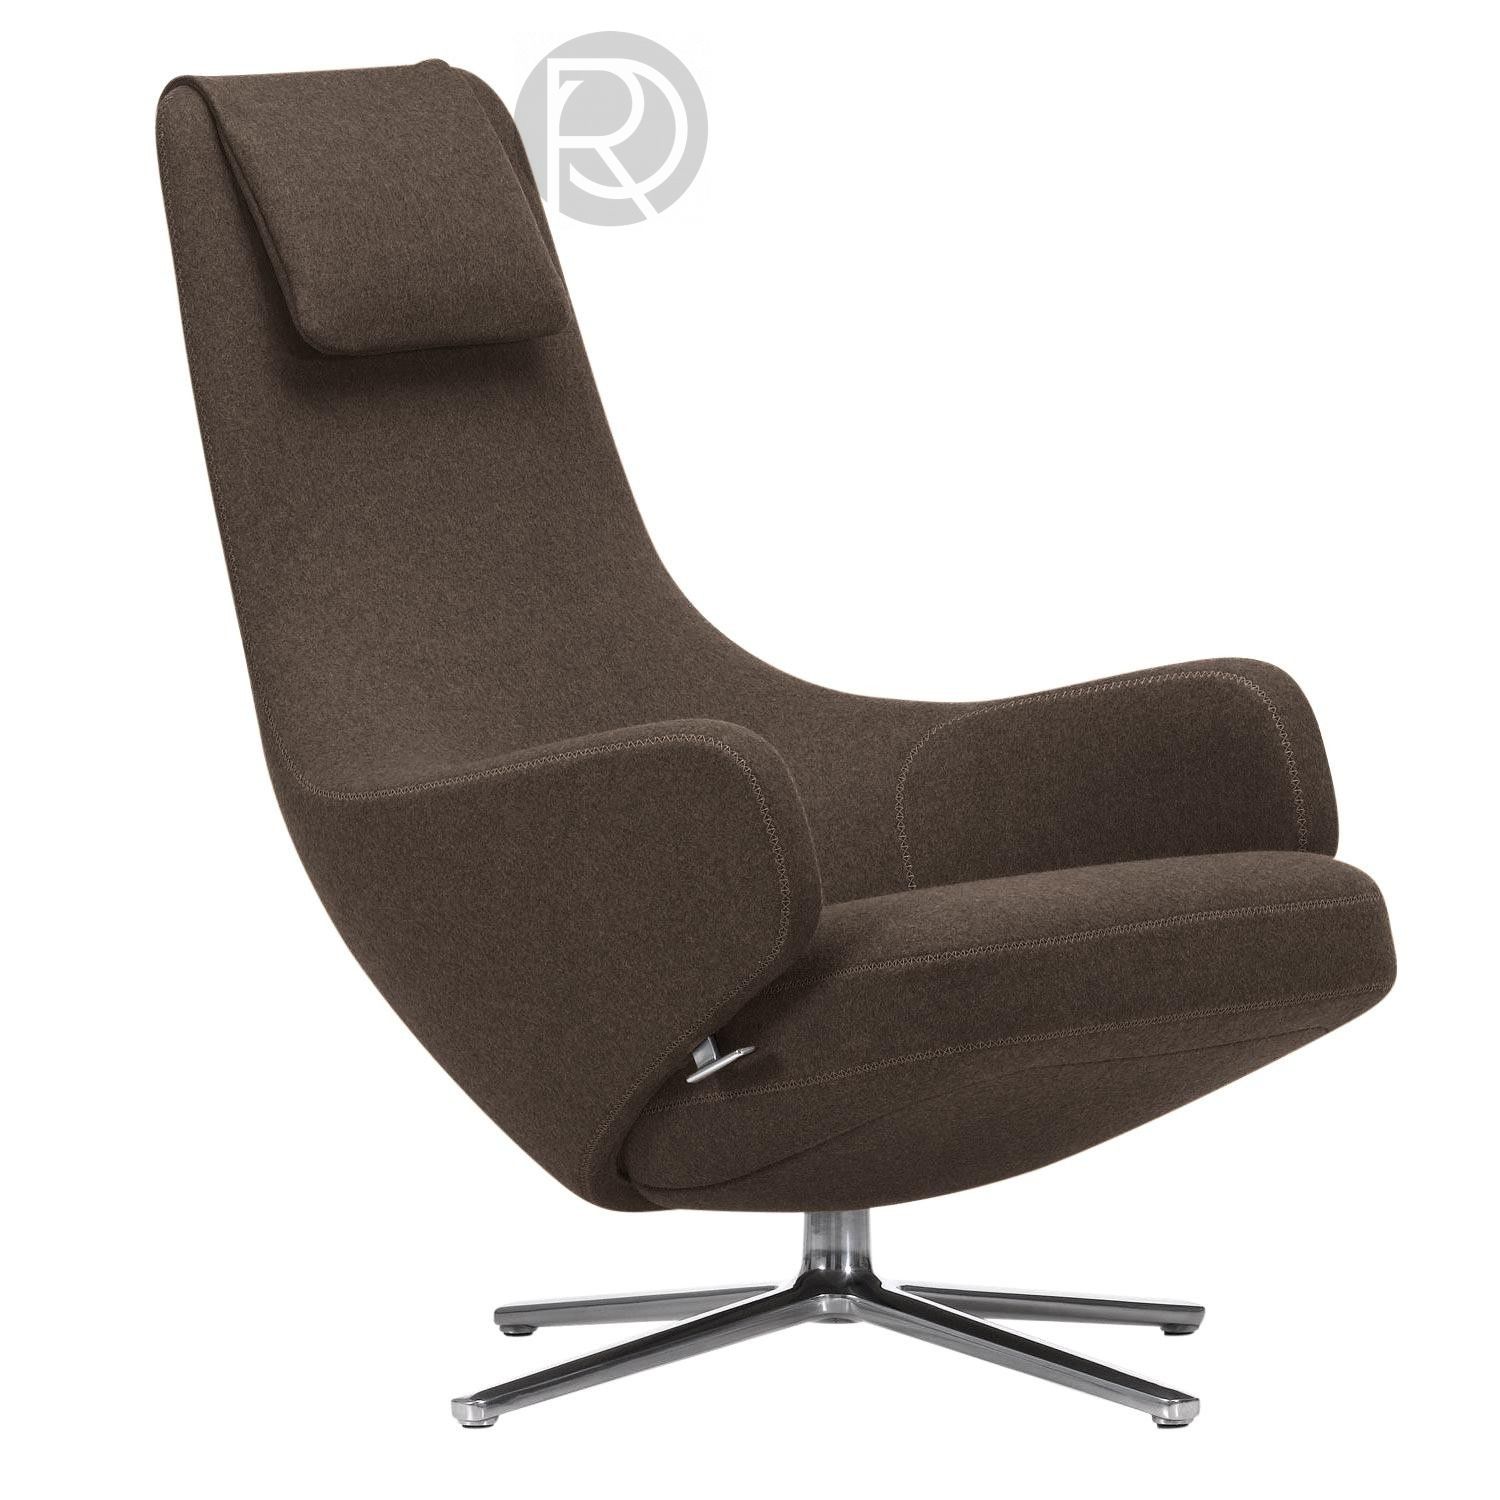 REPOS LOUNGE chair by Vitra